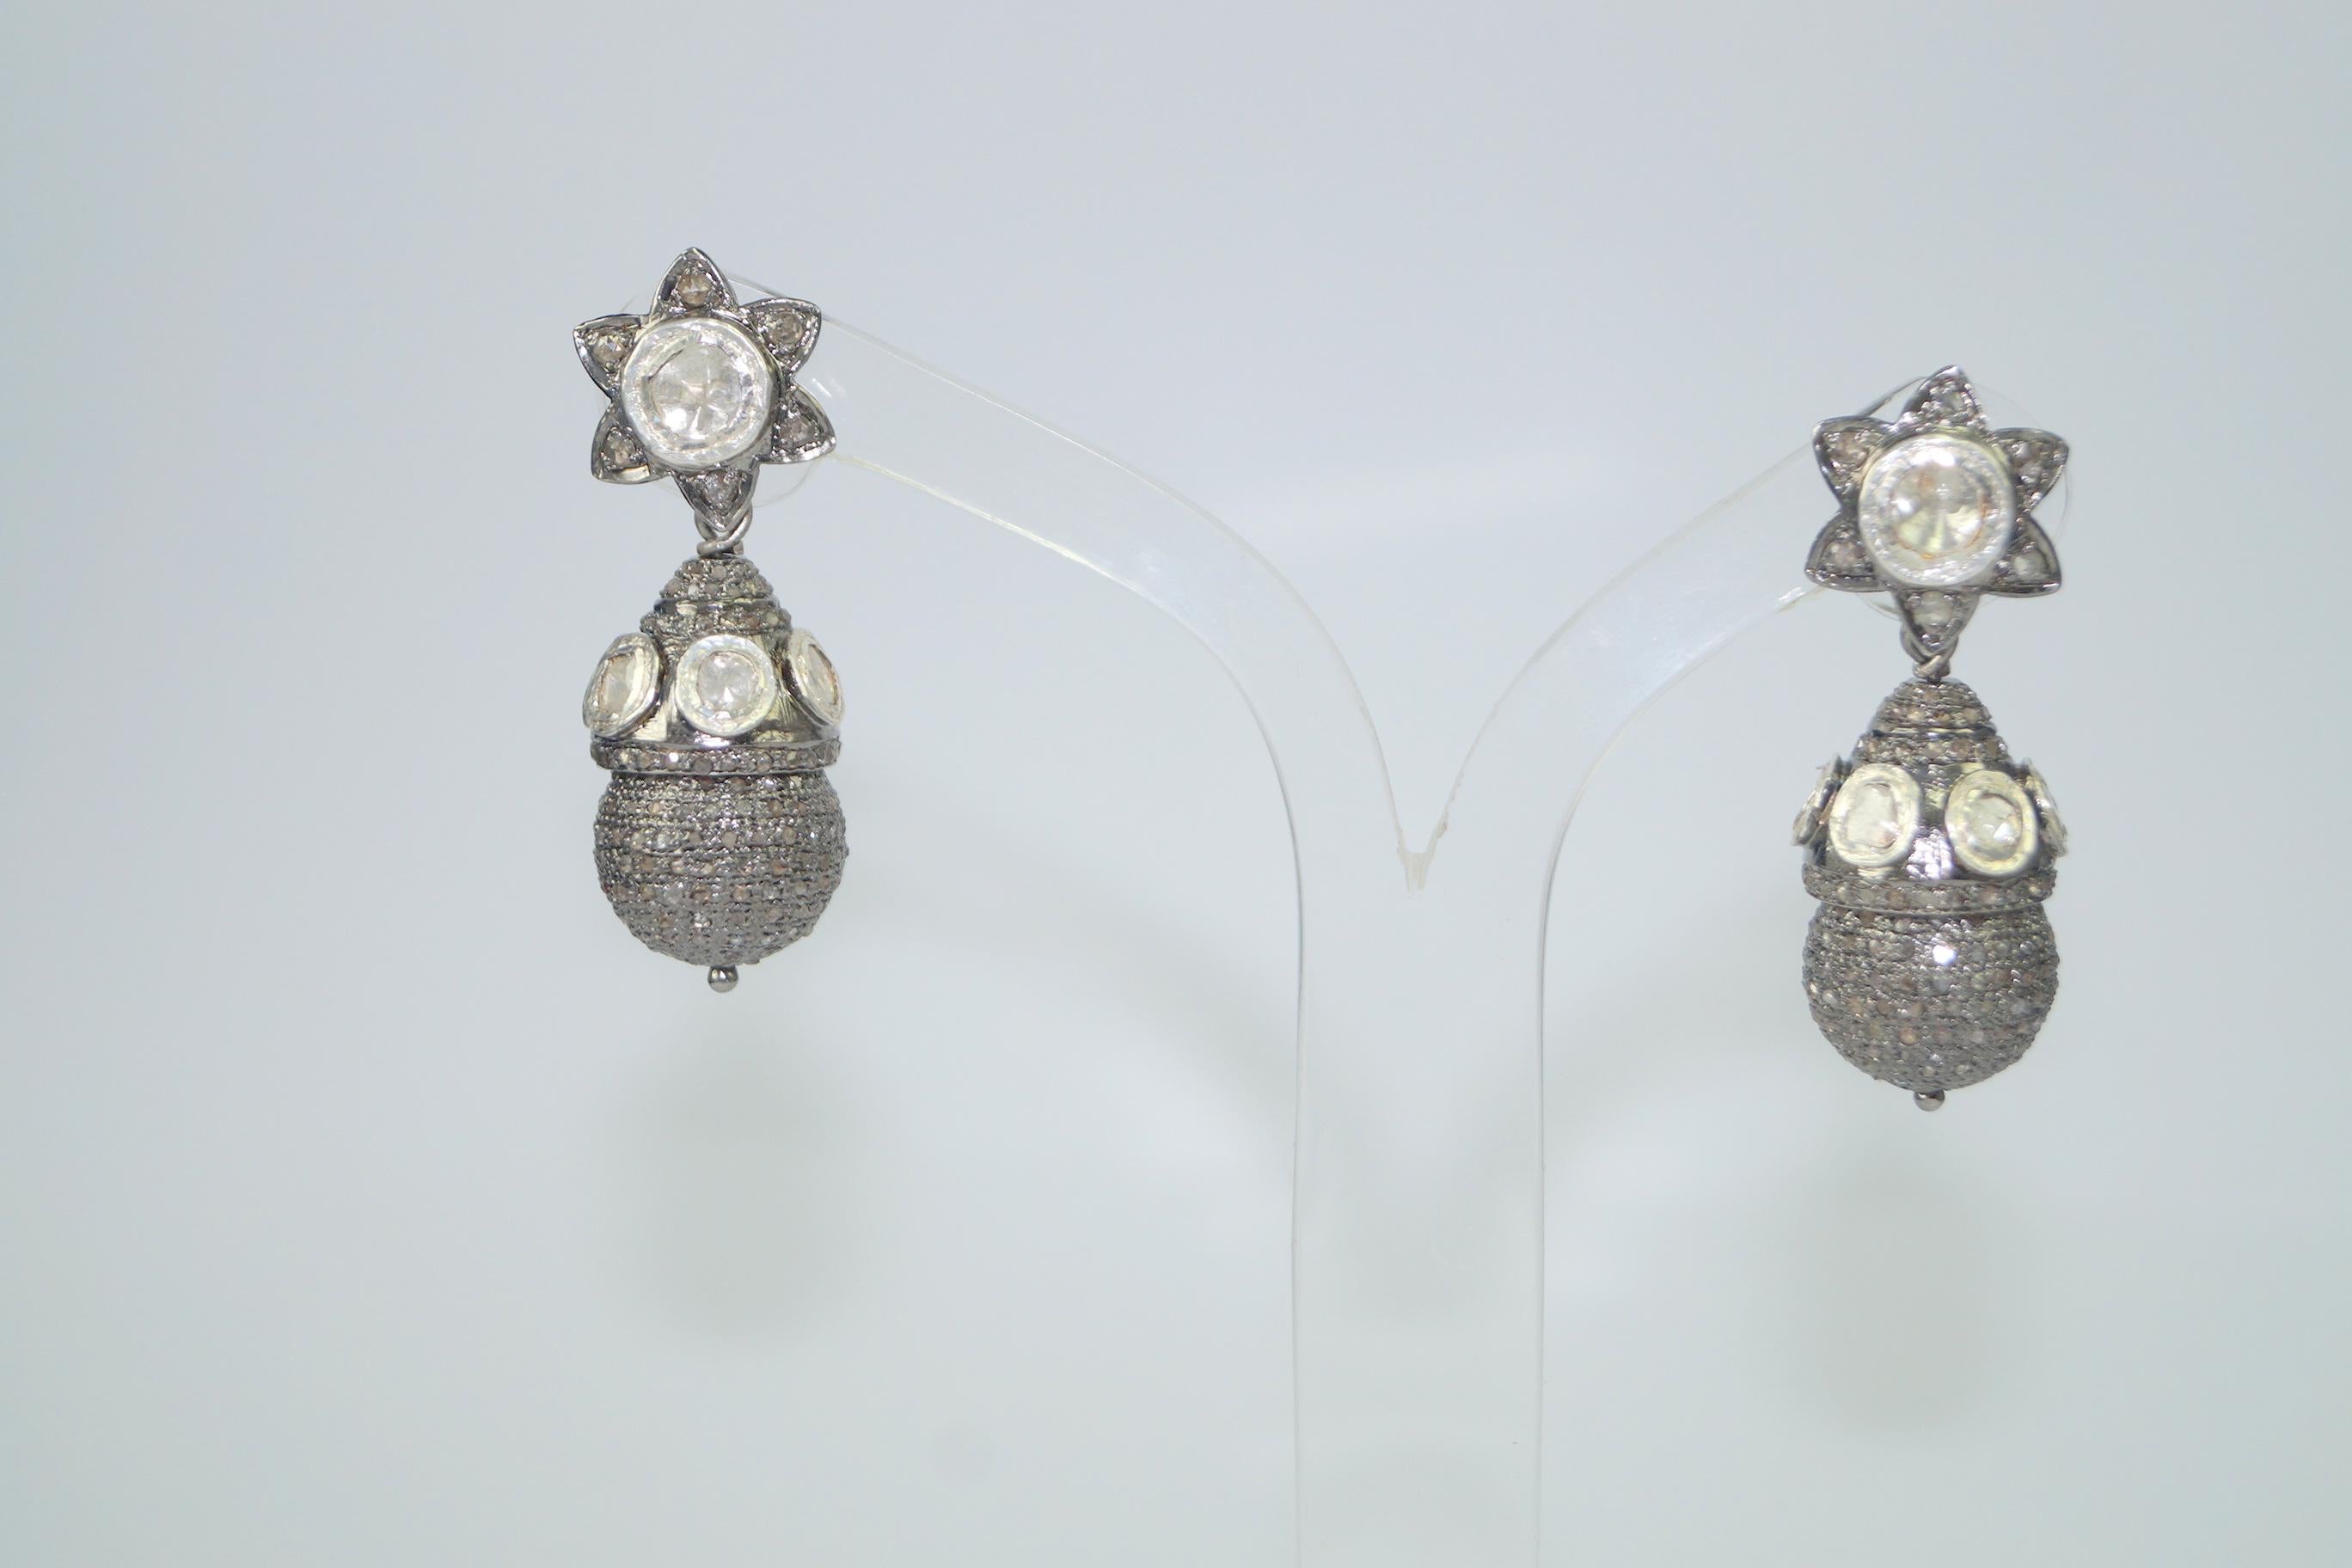 The beautiful elegant natural diamond sterling silver dangle earrings consists of-

Diamond type- Natural Uncut rose cut diamonds
Diamond color- White with a tint of brown
Diamond weight- 4.95cts 

Metal- sterling silver
Metal color- oxidized silver